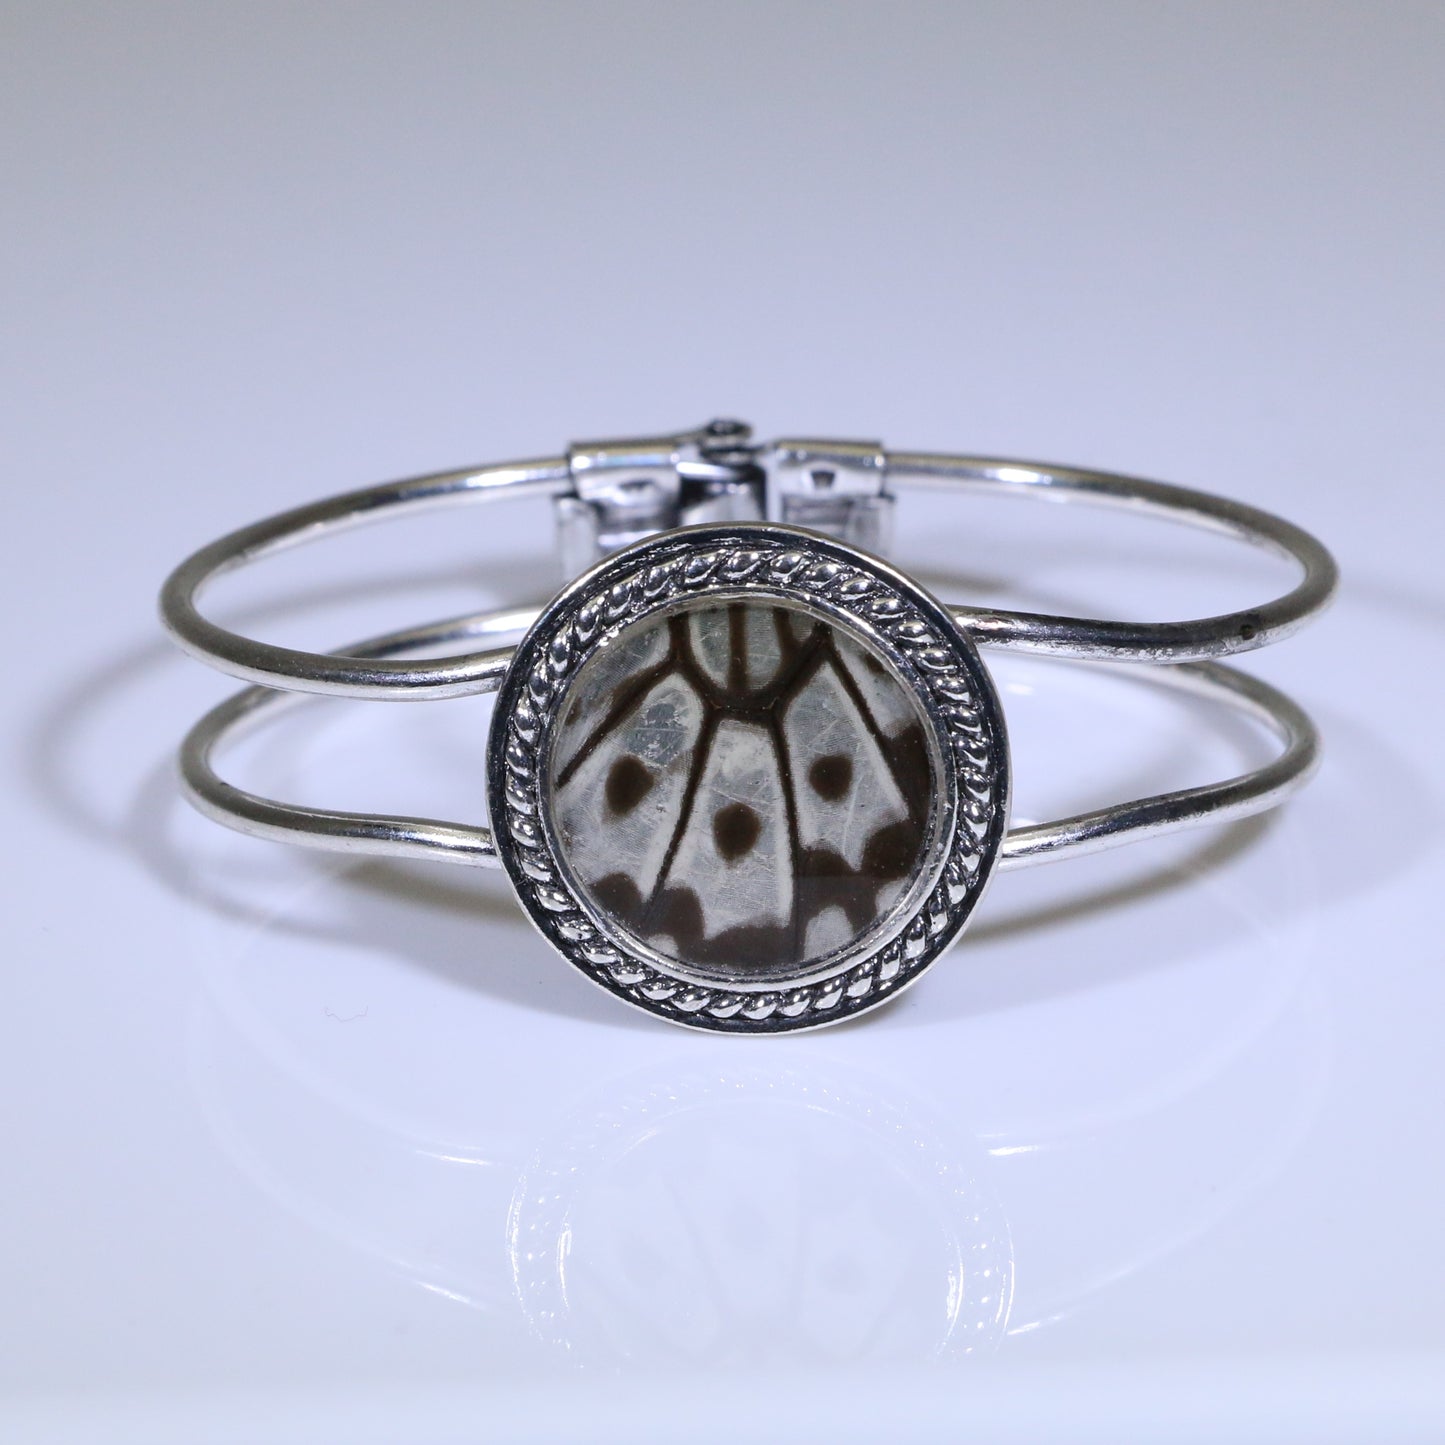 53959 - Real Butterfly Wing Jewelry - Cuff Bracelet - 25mm - Silver-Plated - Hinged Back - Paper Kite